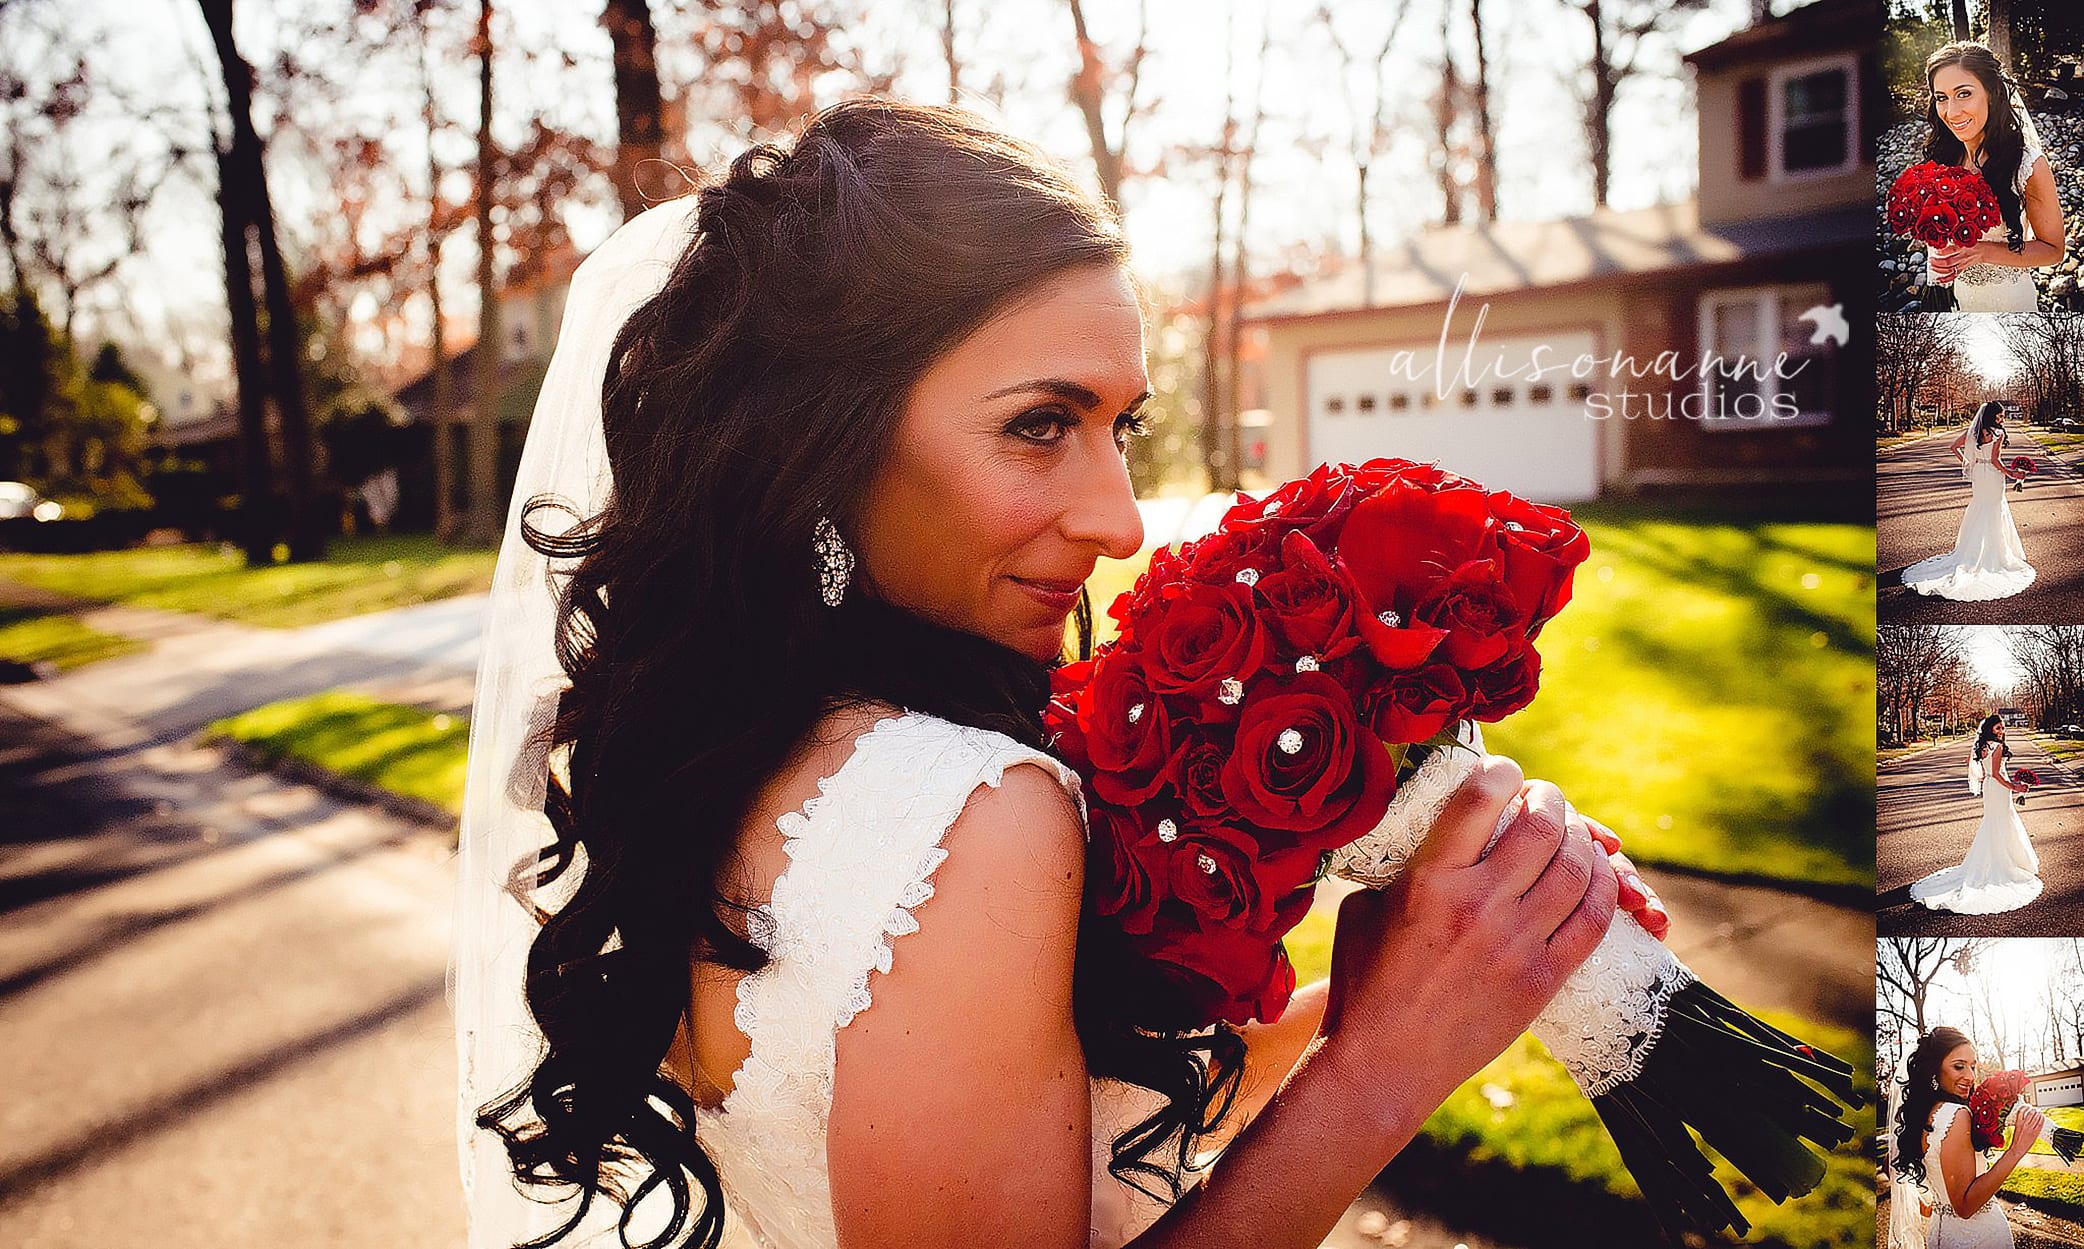 Carriage House, South Jersey, best Photographer South Jersey, Grandma, love, AllisonAnne Studios, Allison Gallagher, Hammonton, The Dance Connection, Winter Wedding, Donny, Holly, Red Bridesmaid Dresses, Faux Fur Bridal Jacket